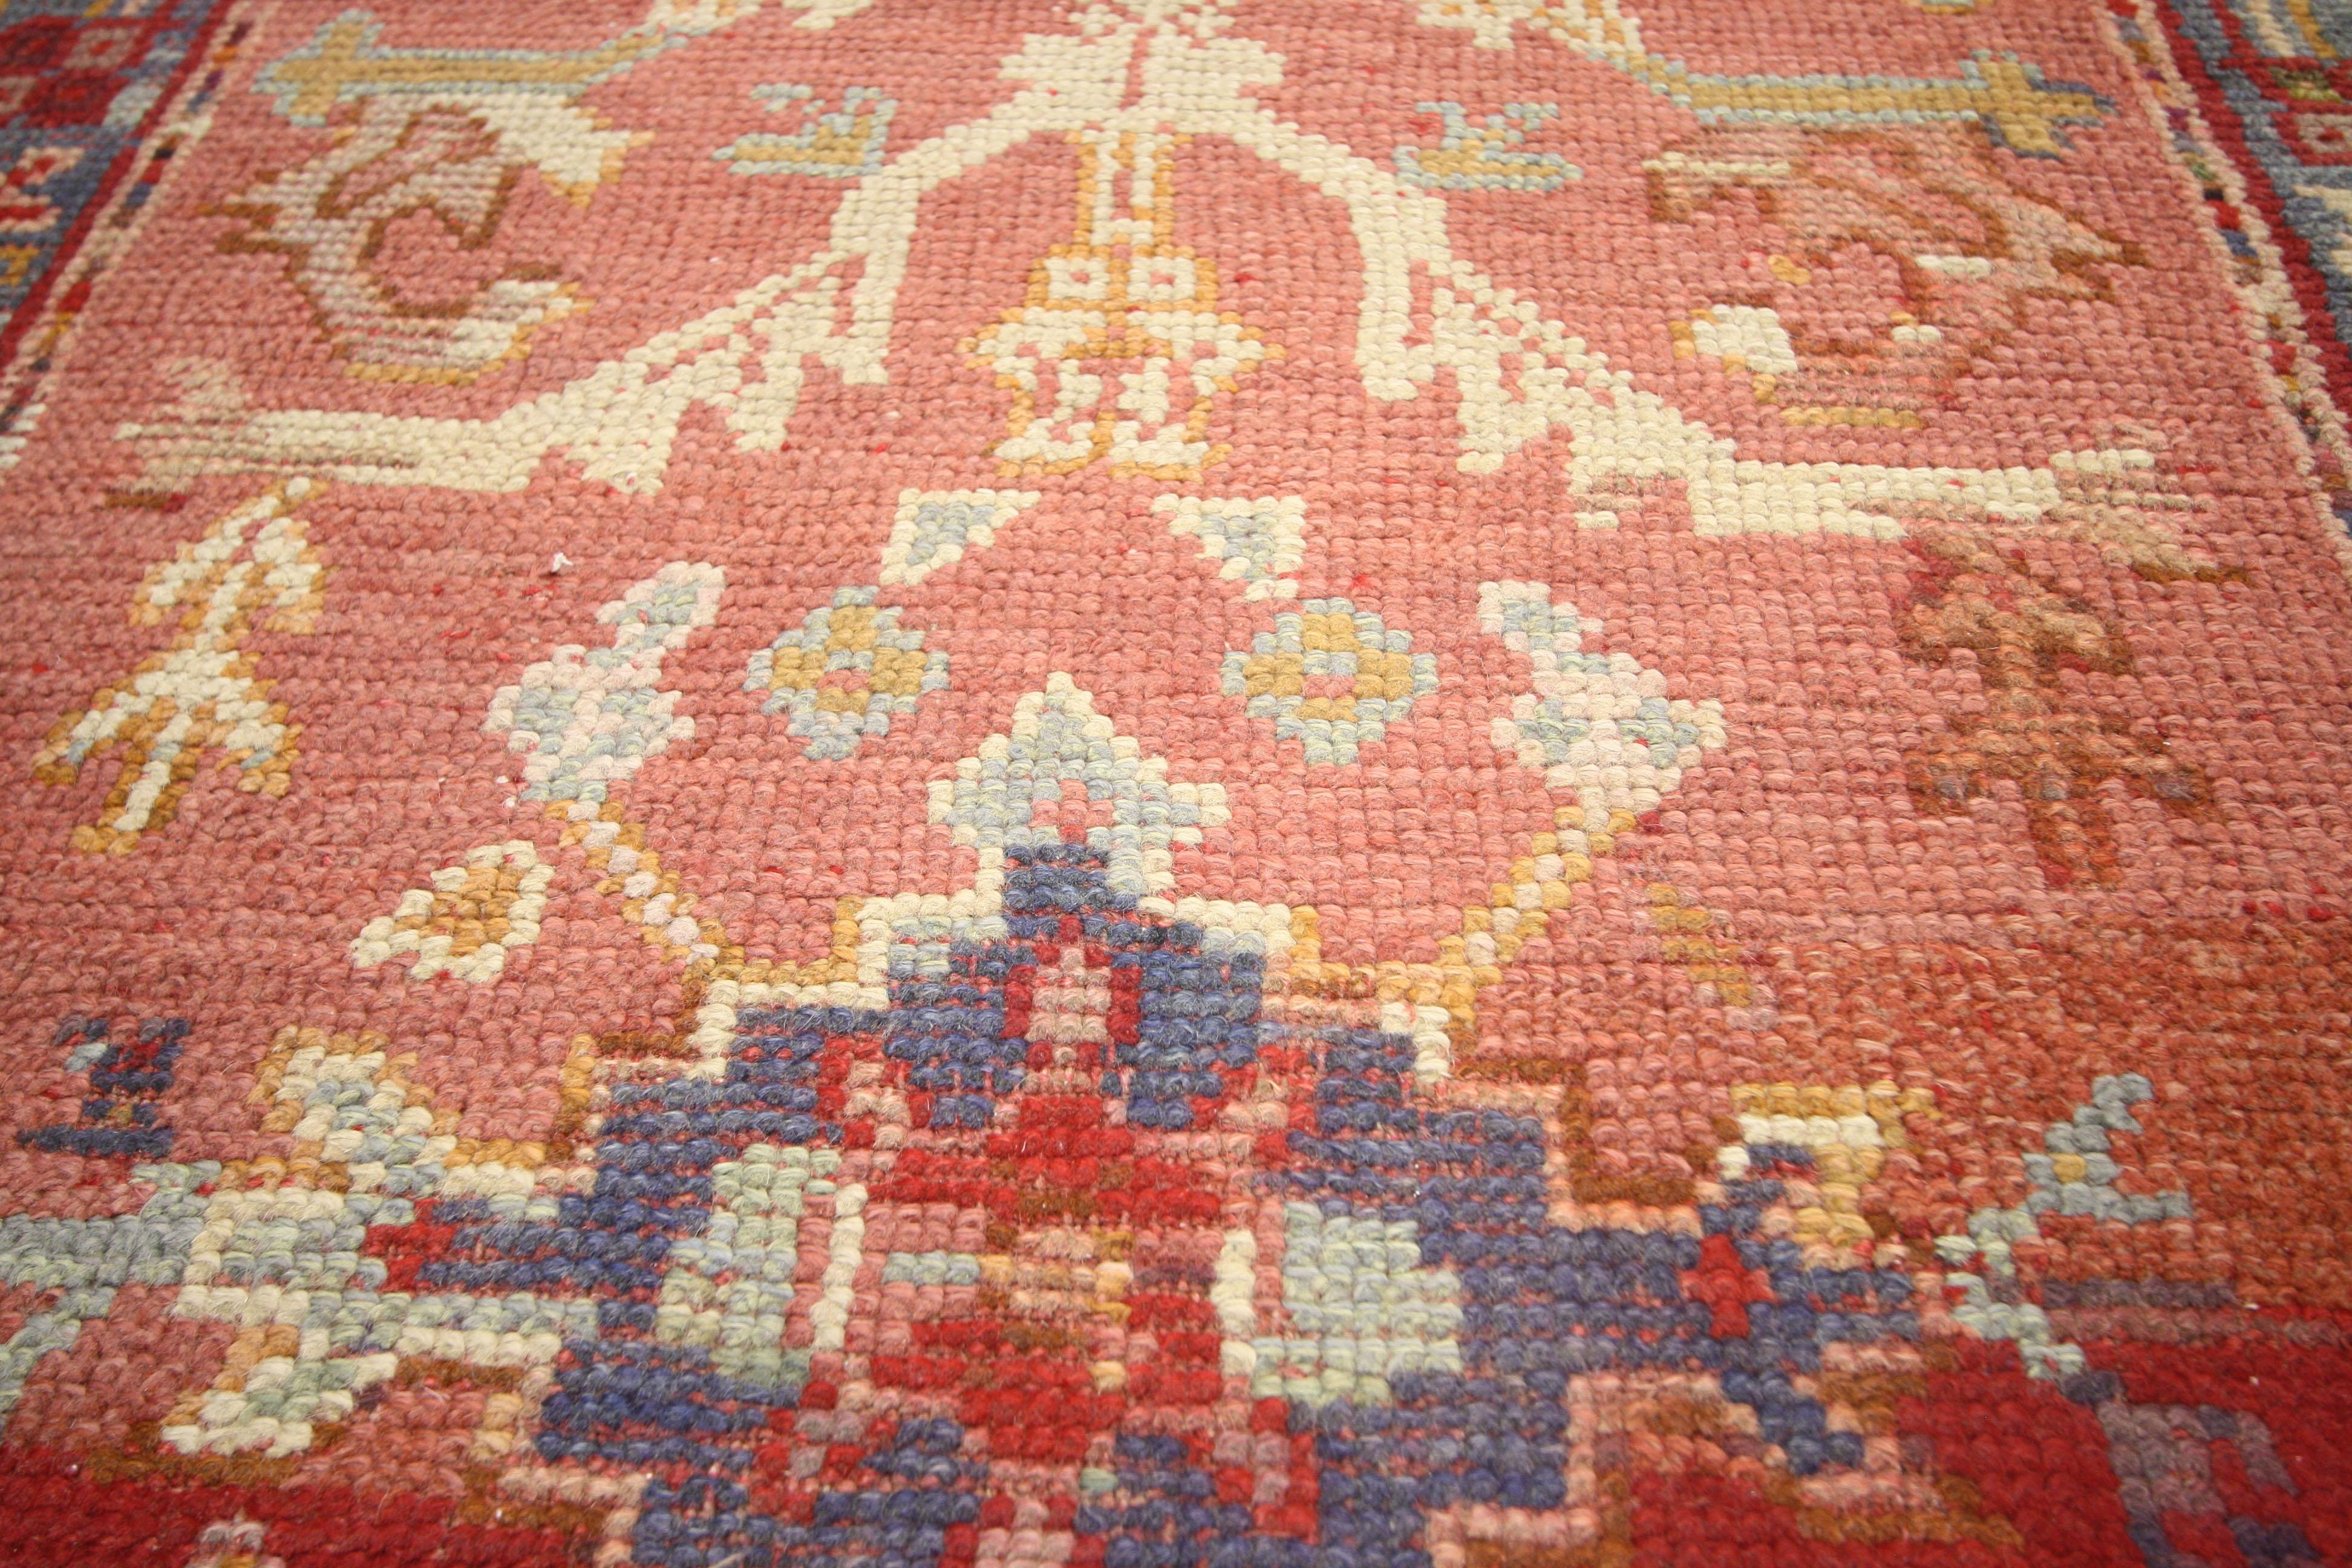 73779 Vintage Turkish Oushak Runner, Hallway Runner. This hand-knotted vintage Turkish Oushak carpet runner features a traditional modern style. Showcasing a geometric pattern in a red abrash field surrounded in a complementary tribal border.